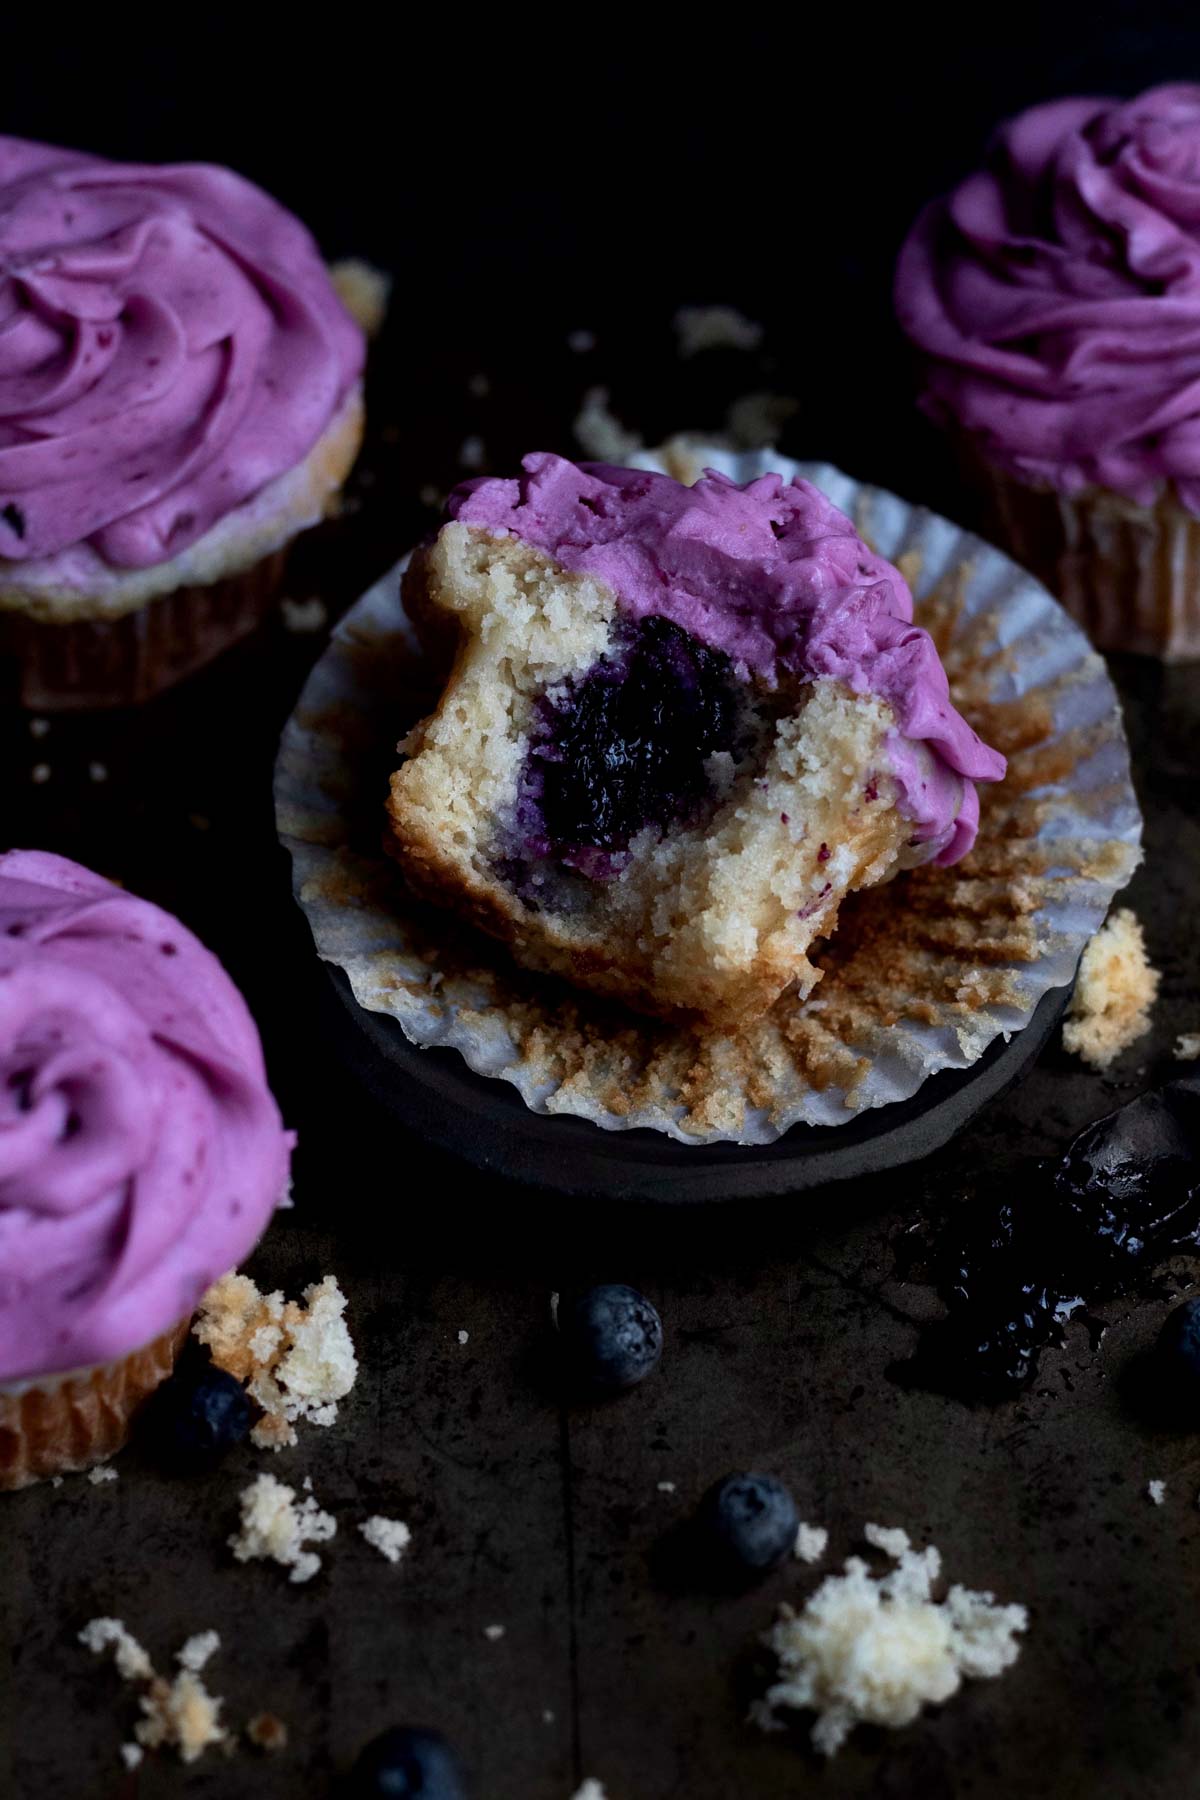 A half-eaten blueberry cupcake with blueberry filling.